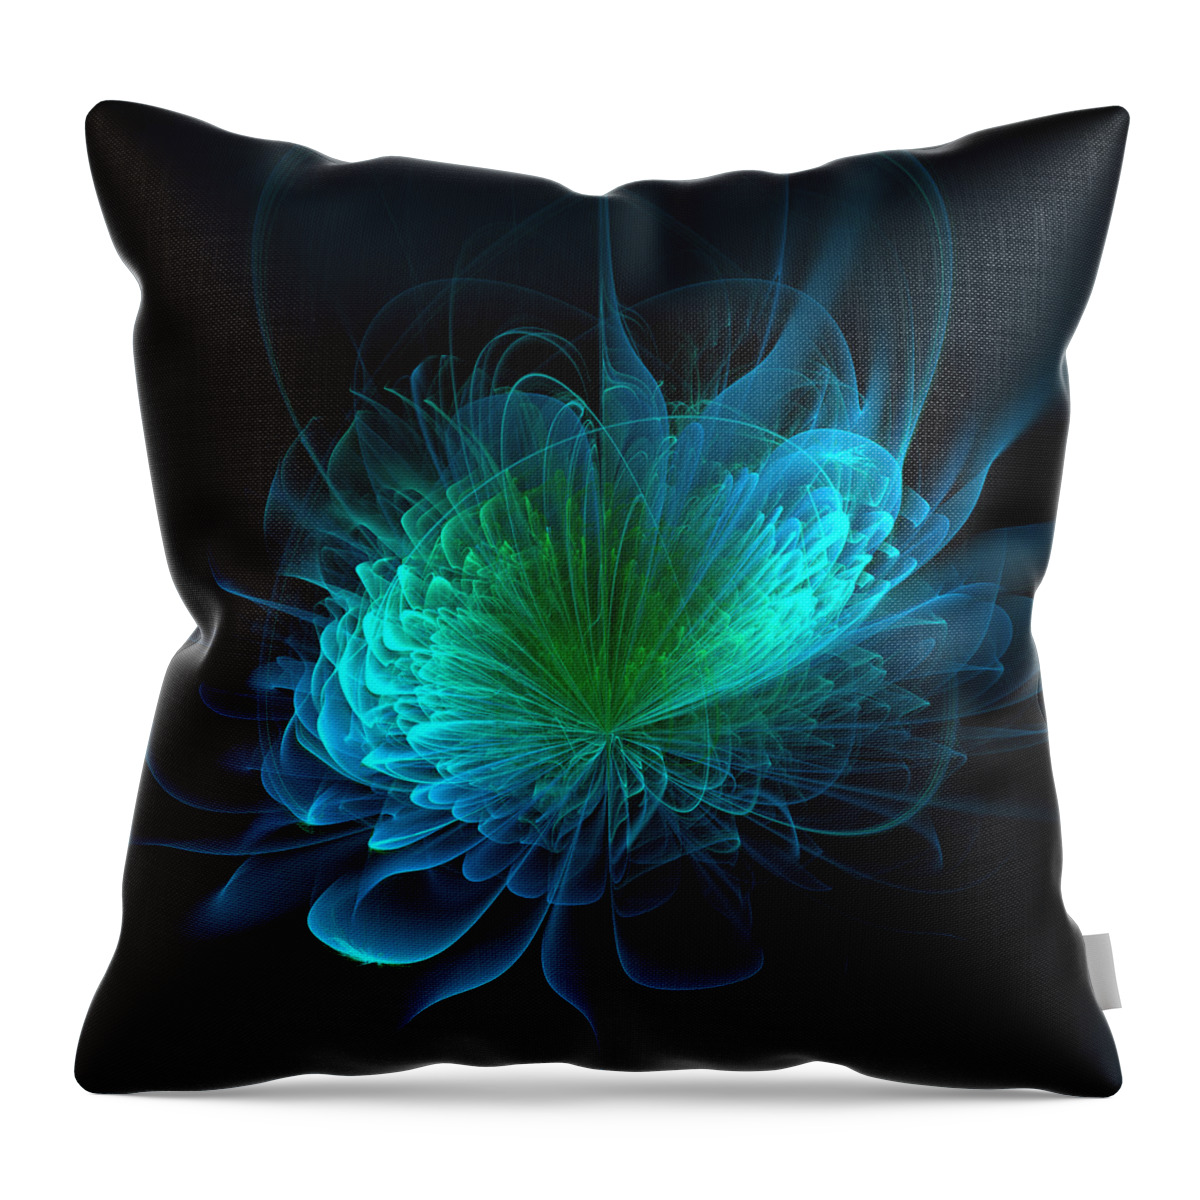  Throw Pillow featuring the digital art The Rose #3 by Mary Ann Benoit